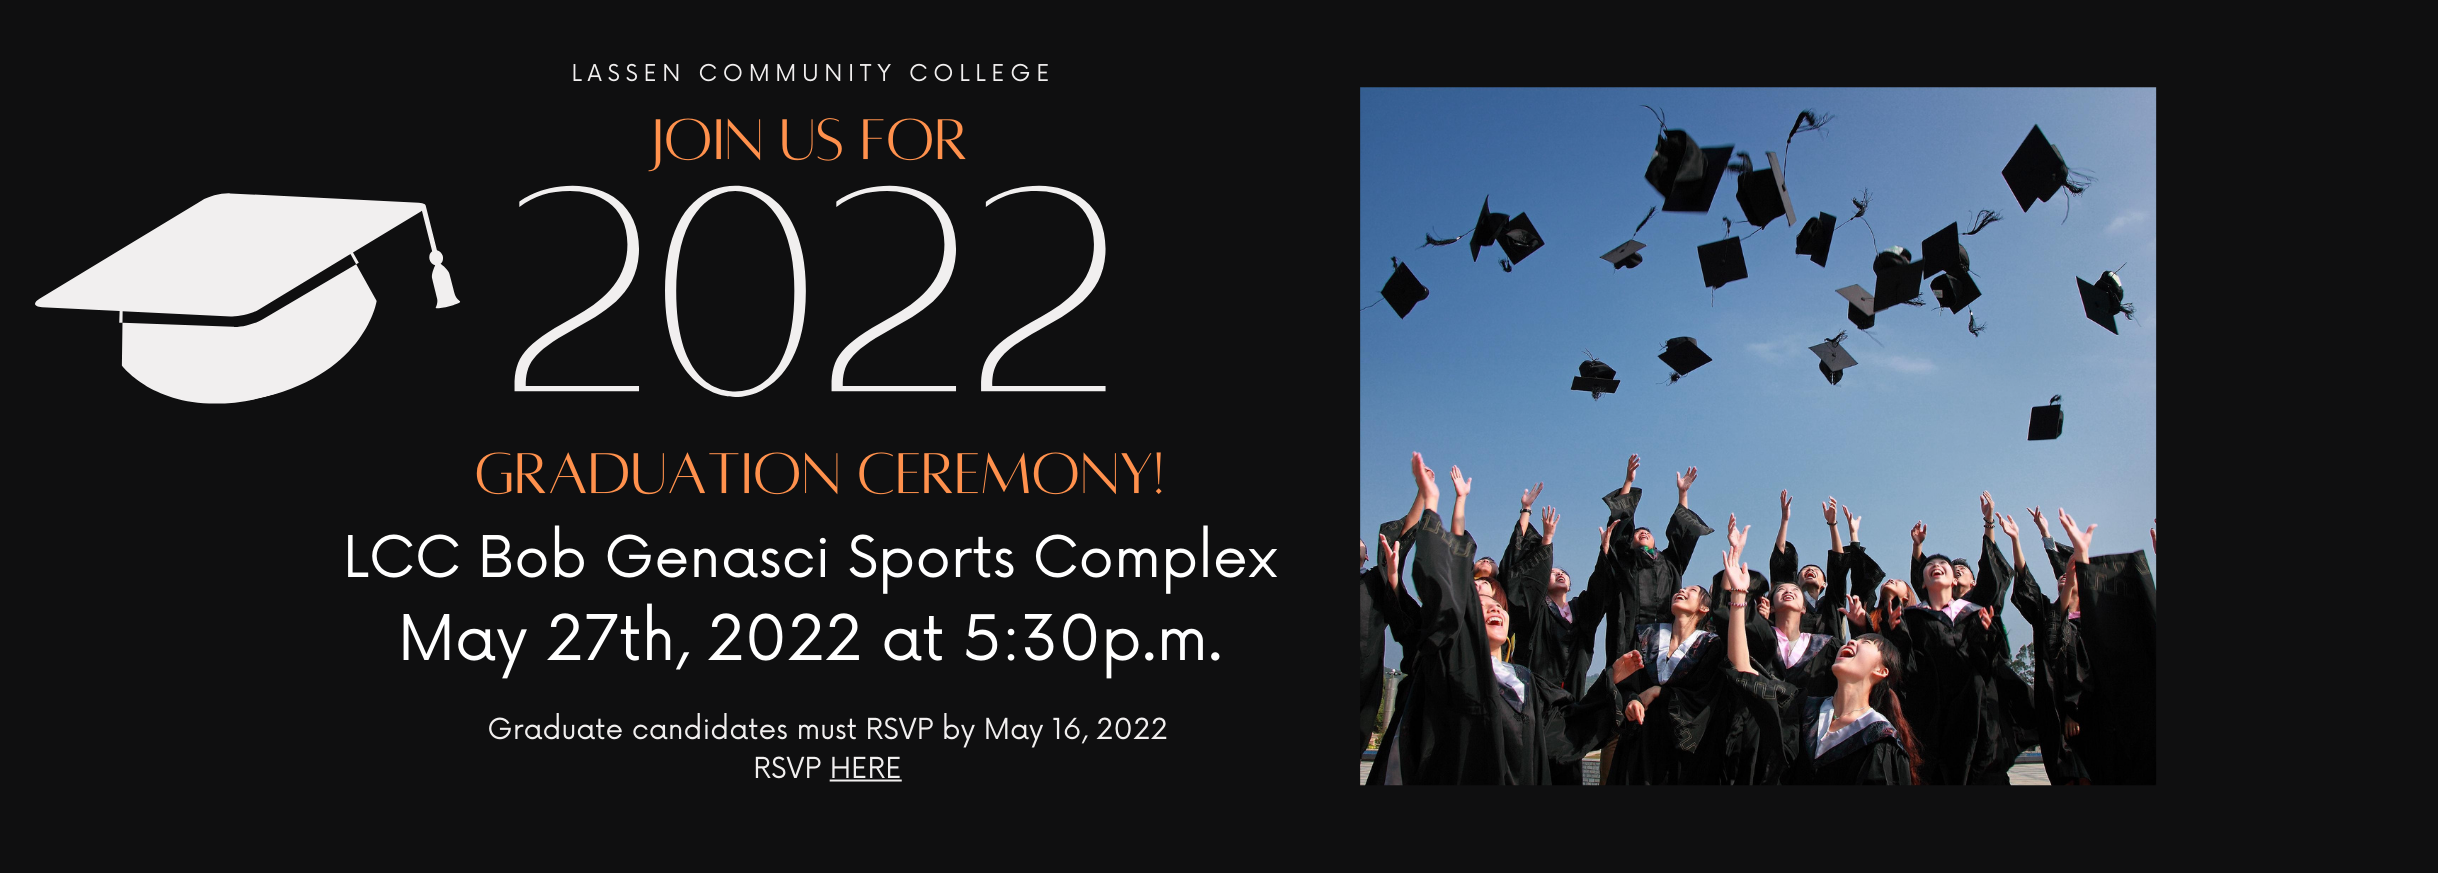 Graduation Commencement Ceremony May 27th at 5:30 PM in the LCC Bob Genasci Sports Complex, click here to RSVP